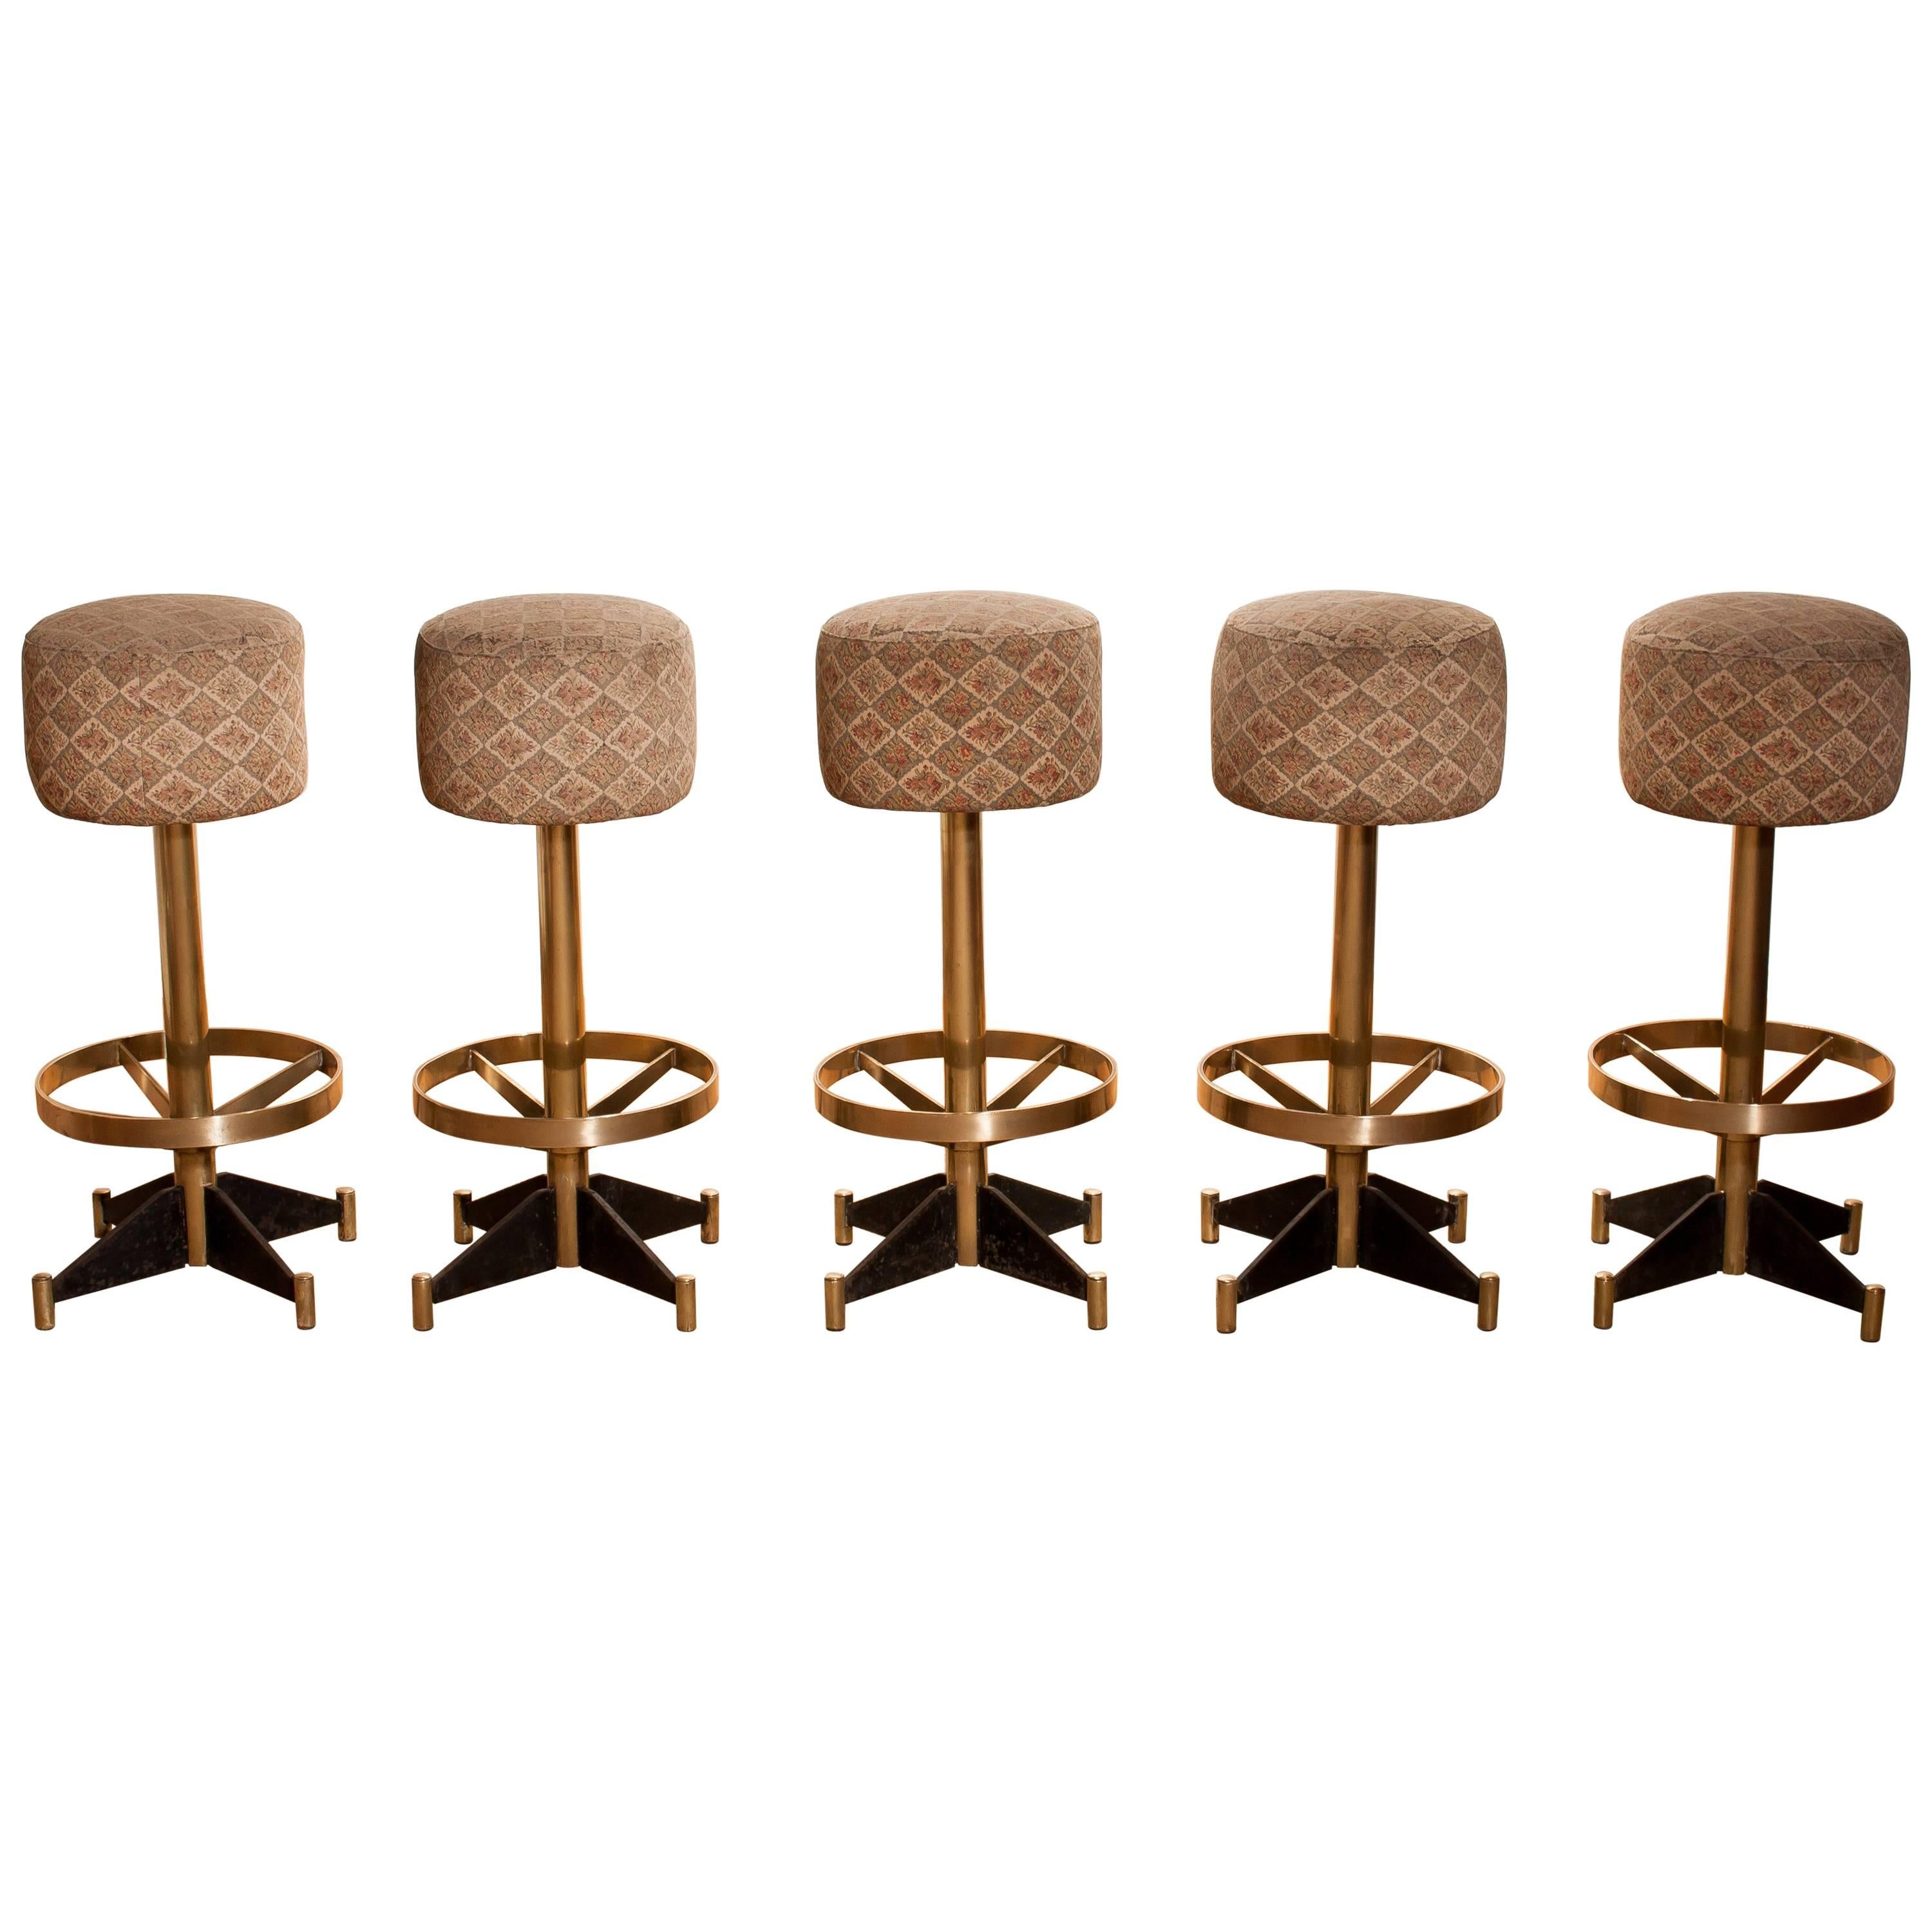 Magnificent set of five swivel bar stools from Italy.
The stools are made of brass and metal with fabric seatings which are reupholstered in the 1980s.
Period 1960s
Dimensions: H 82 cm, ø 46 cm (stand), ø 32 cm (seating).